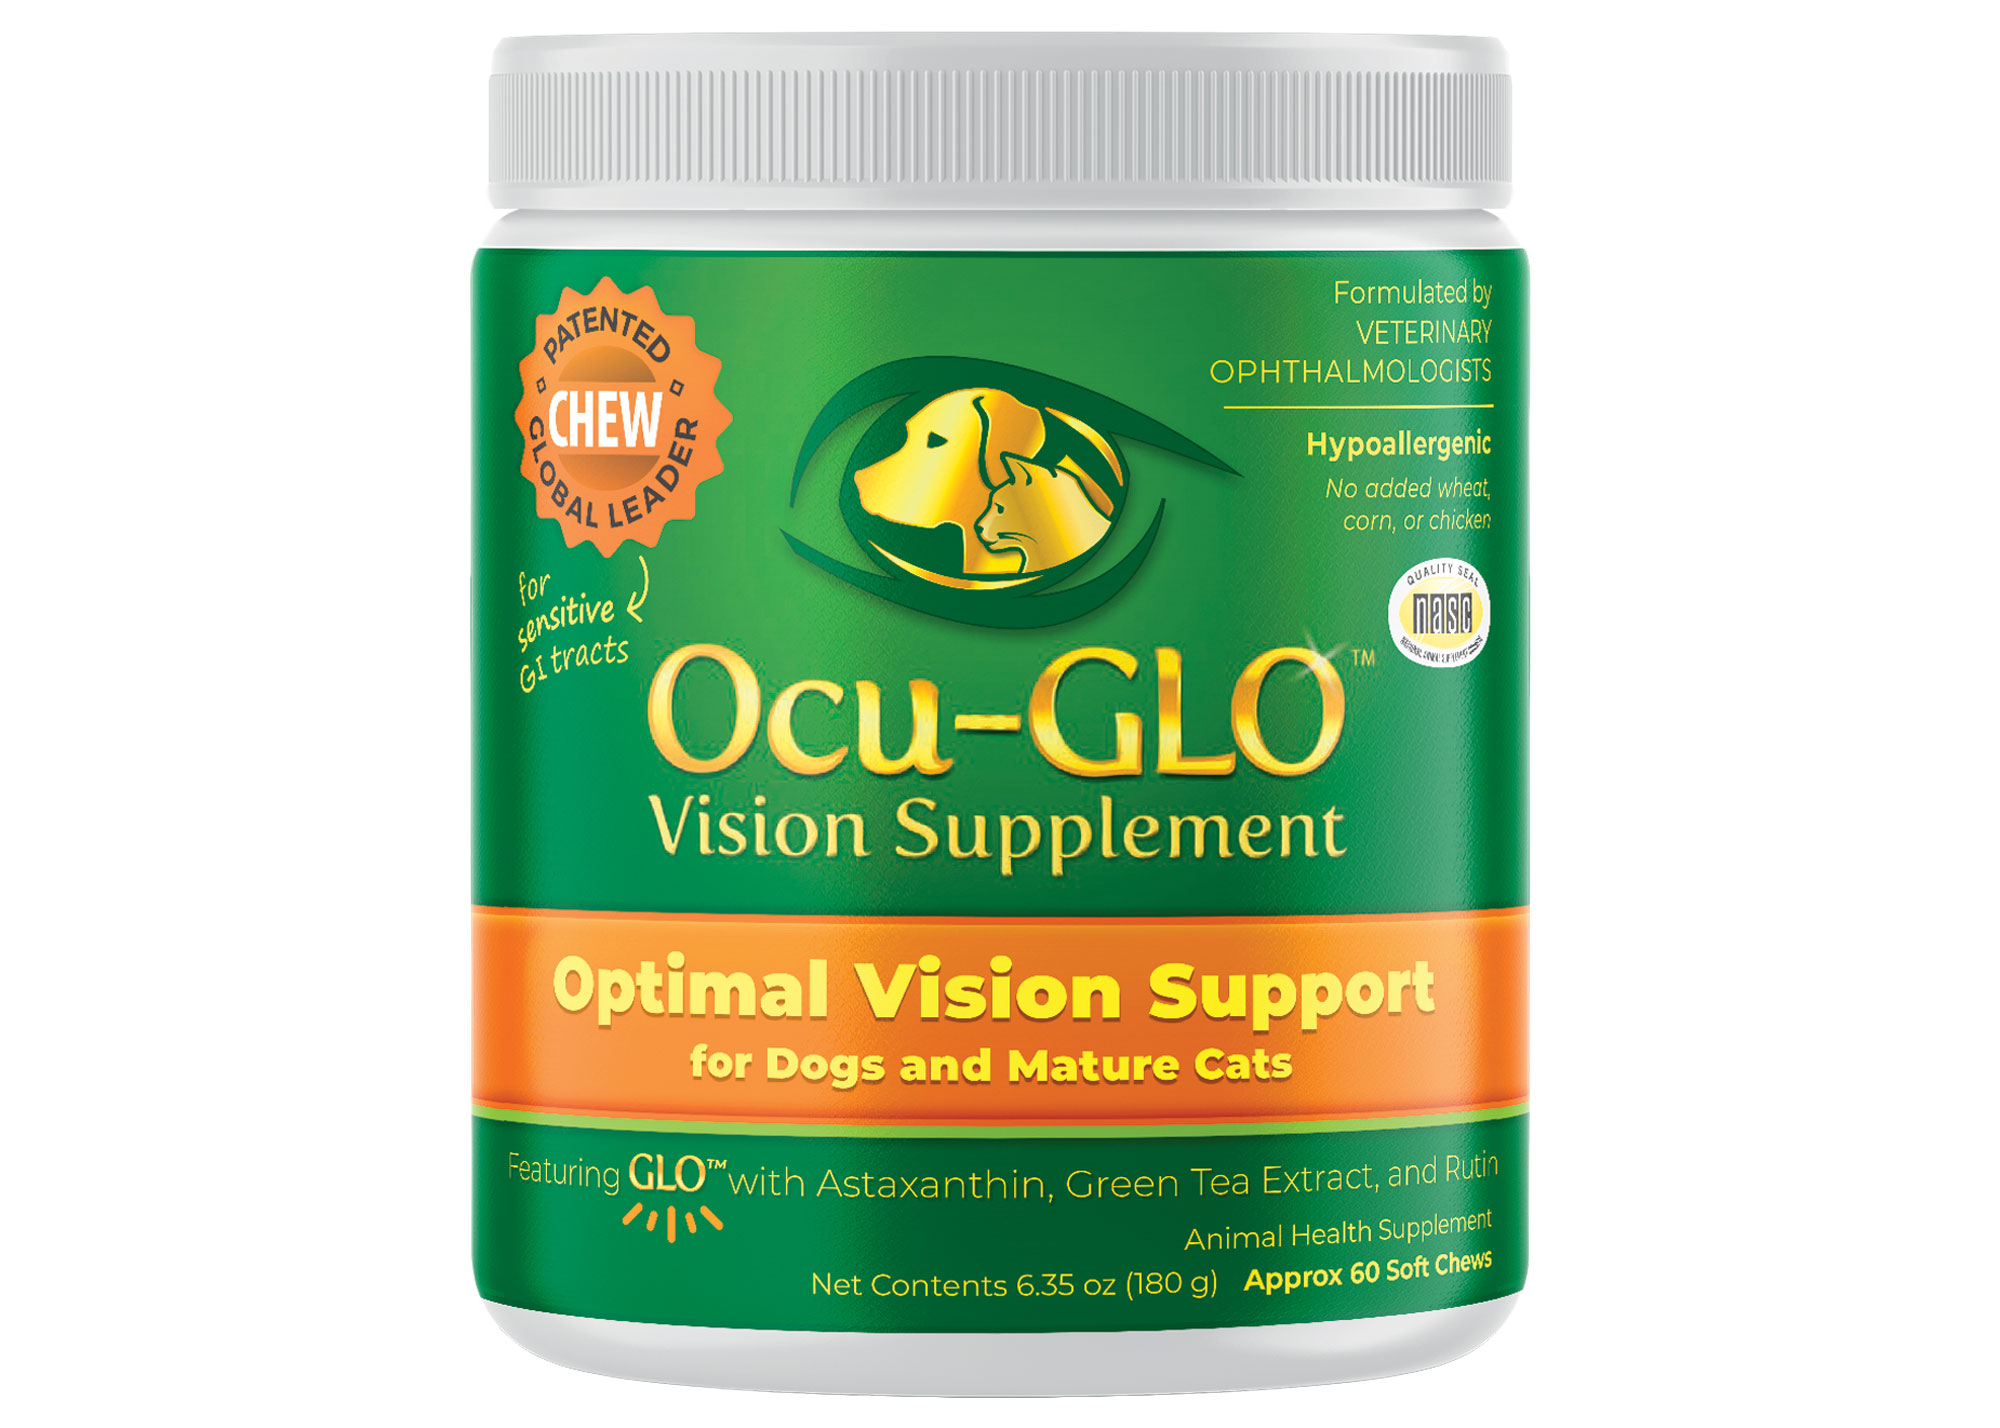 Healthy Paws vision supplement.